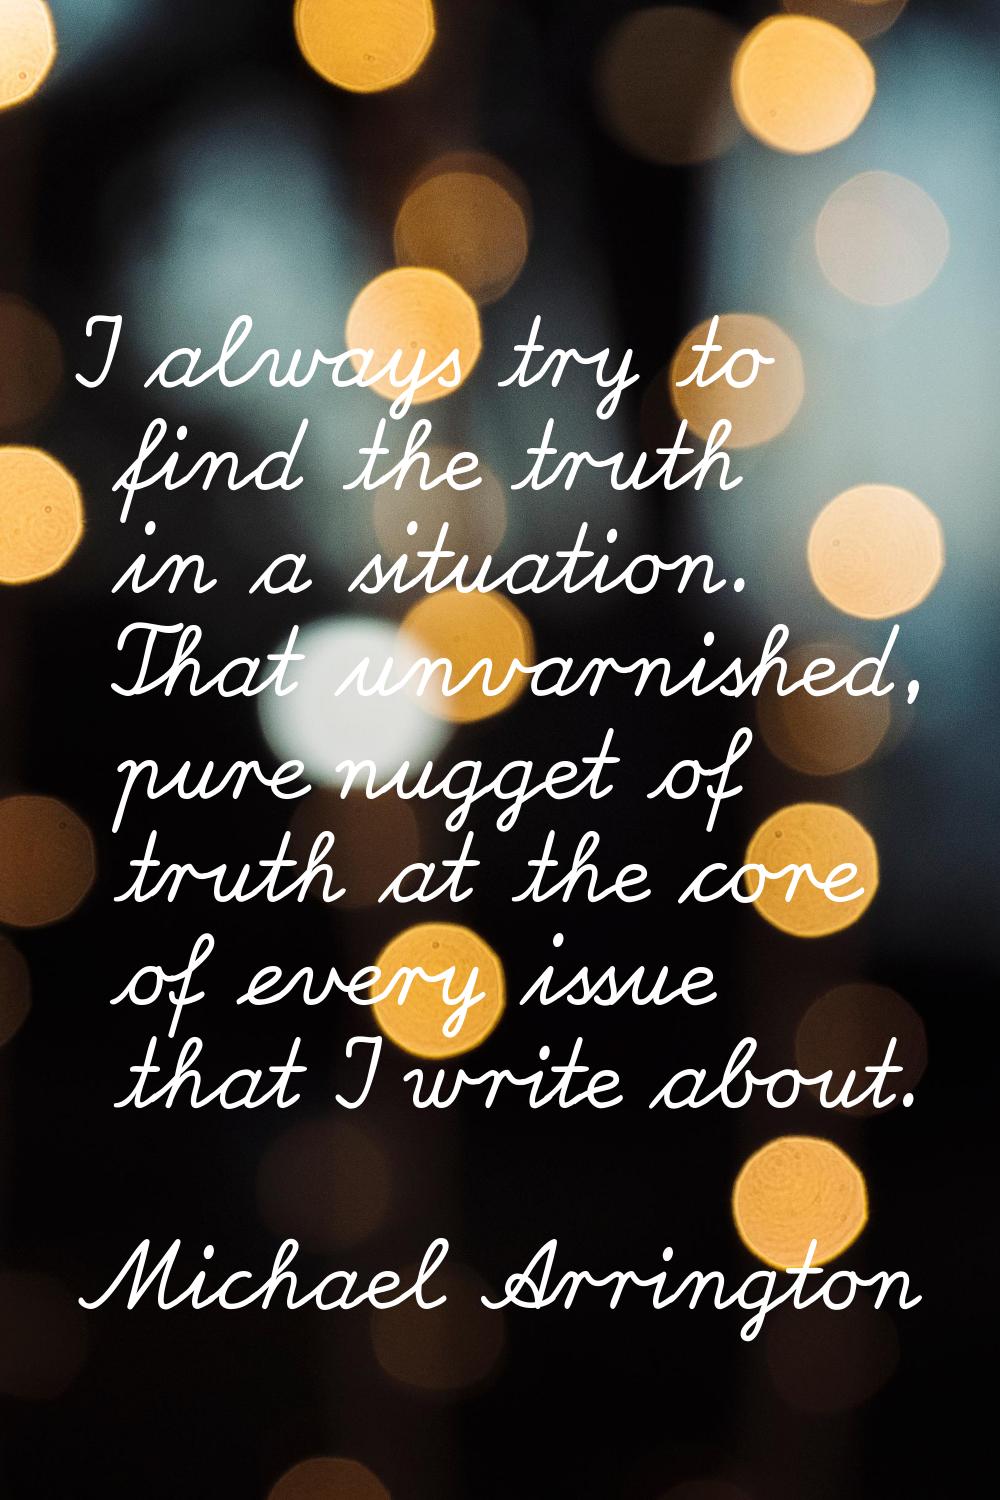 I always try to find the truth in a situation. That unvarnished, pure nugget of truth at the core o